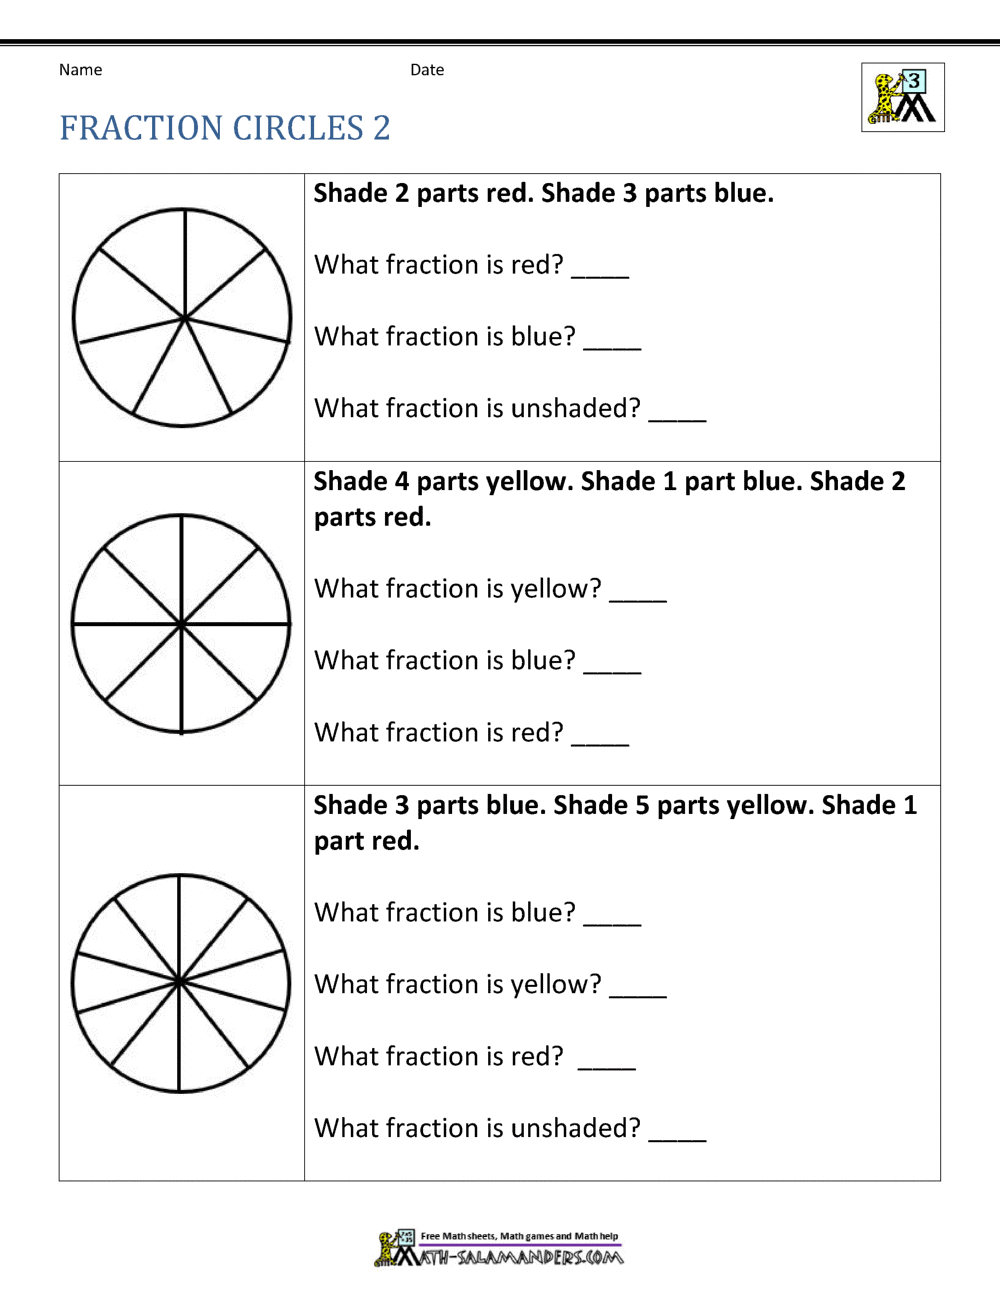 Fractions of Shapes Worksheets For Parts Of A Circle Worksheet